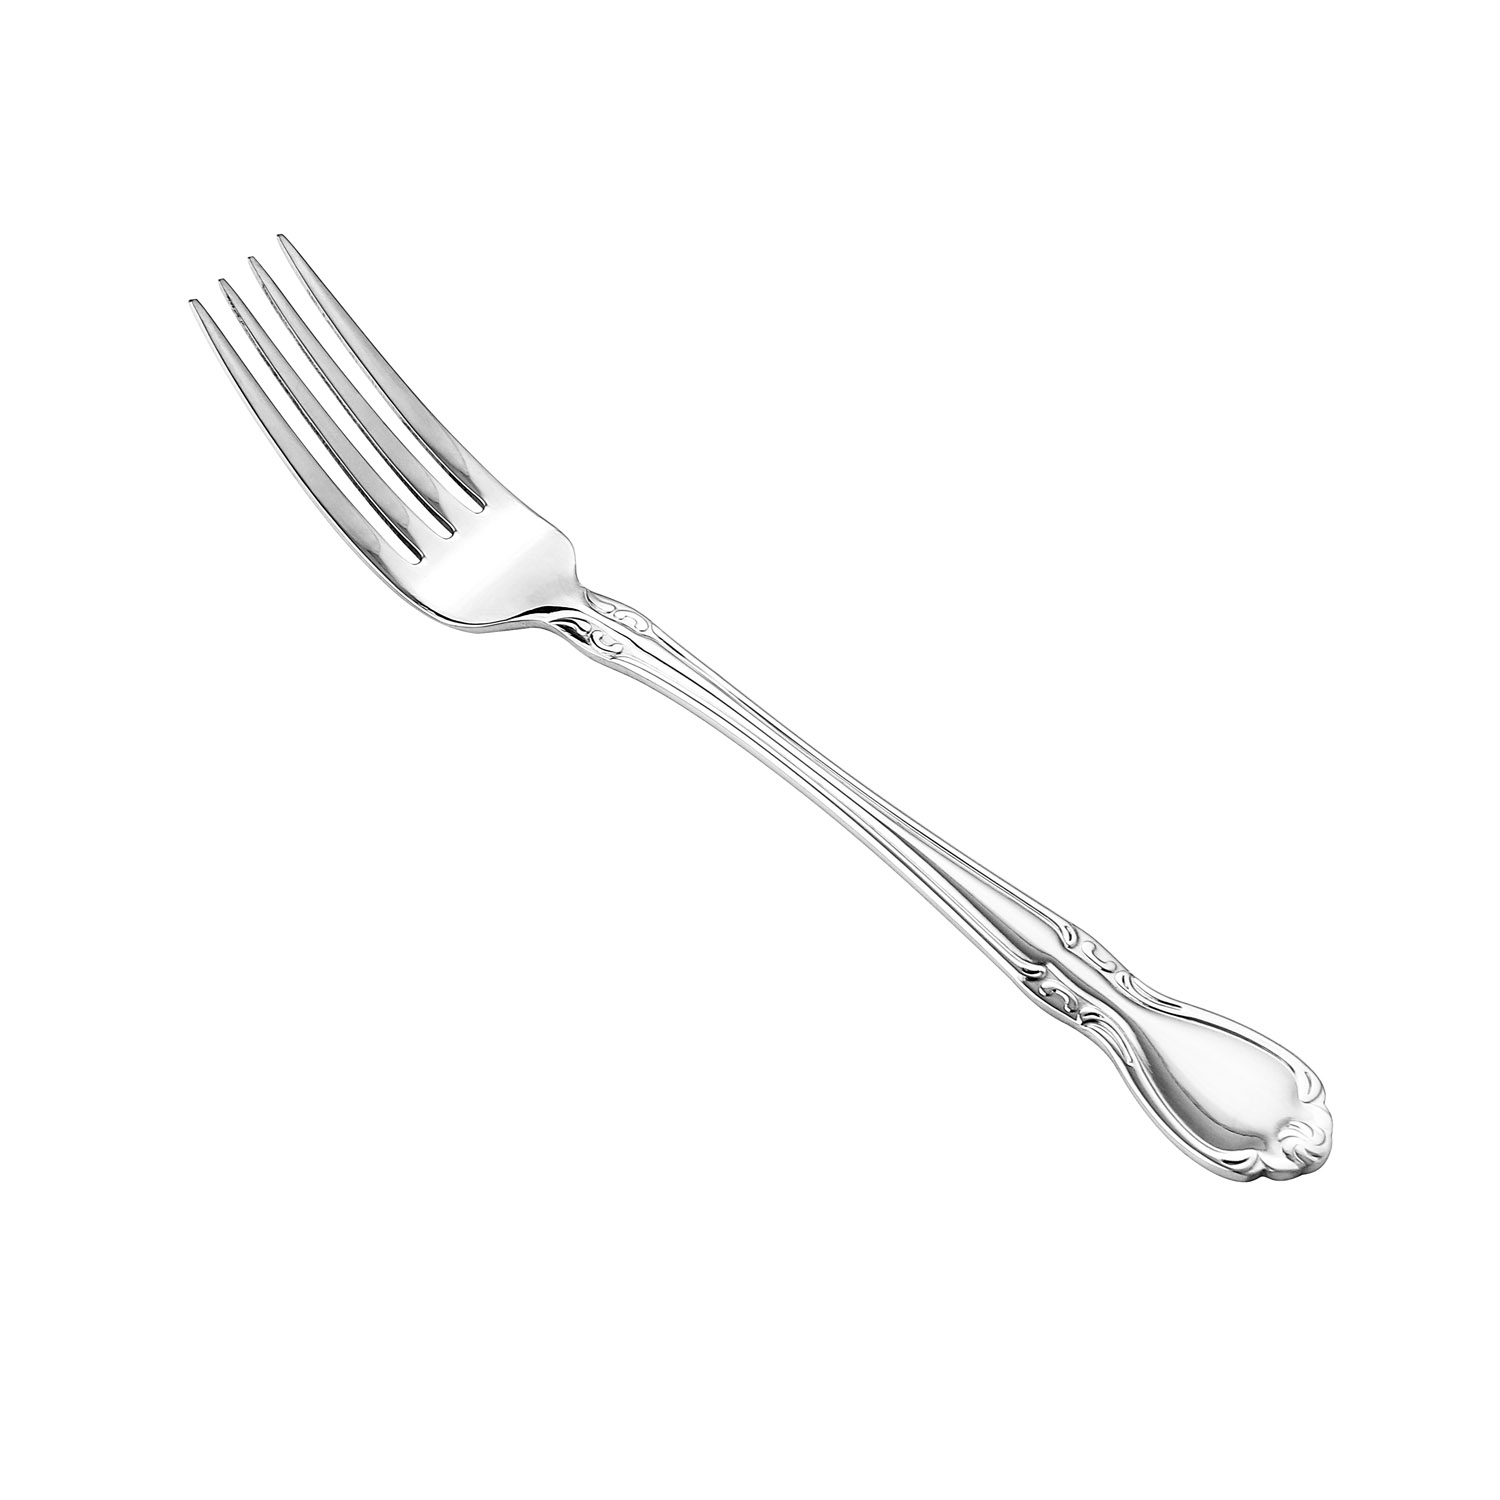 CAC China 8023-05 Glamour Dinner Fork, Extra Heavy Weight 18/8, 7 1/4" - 1 dozen